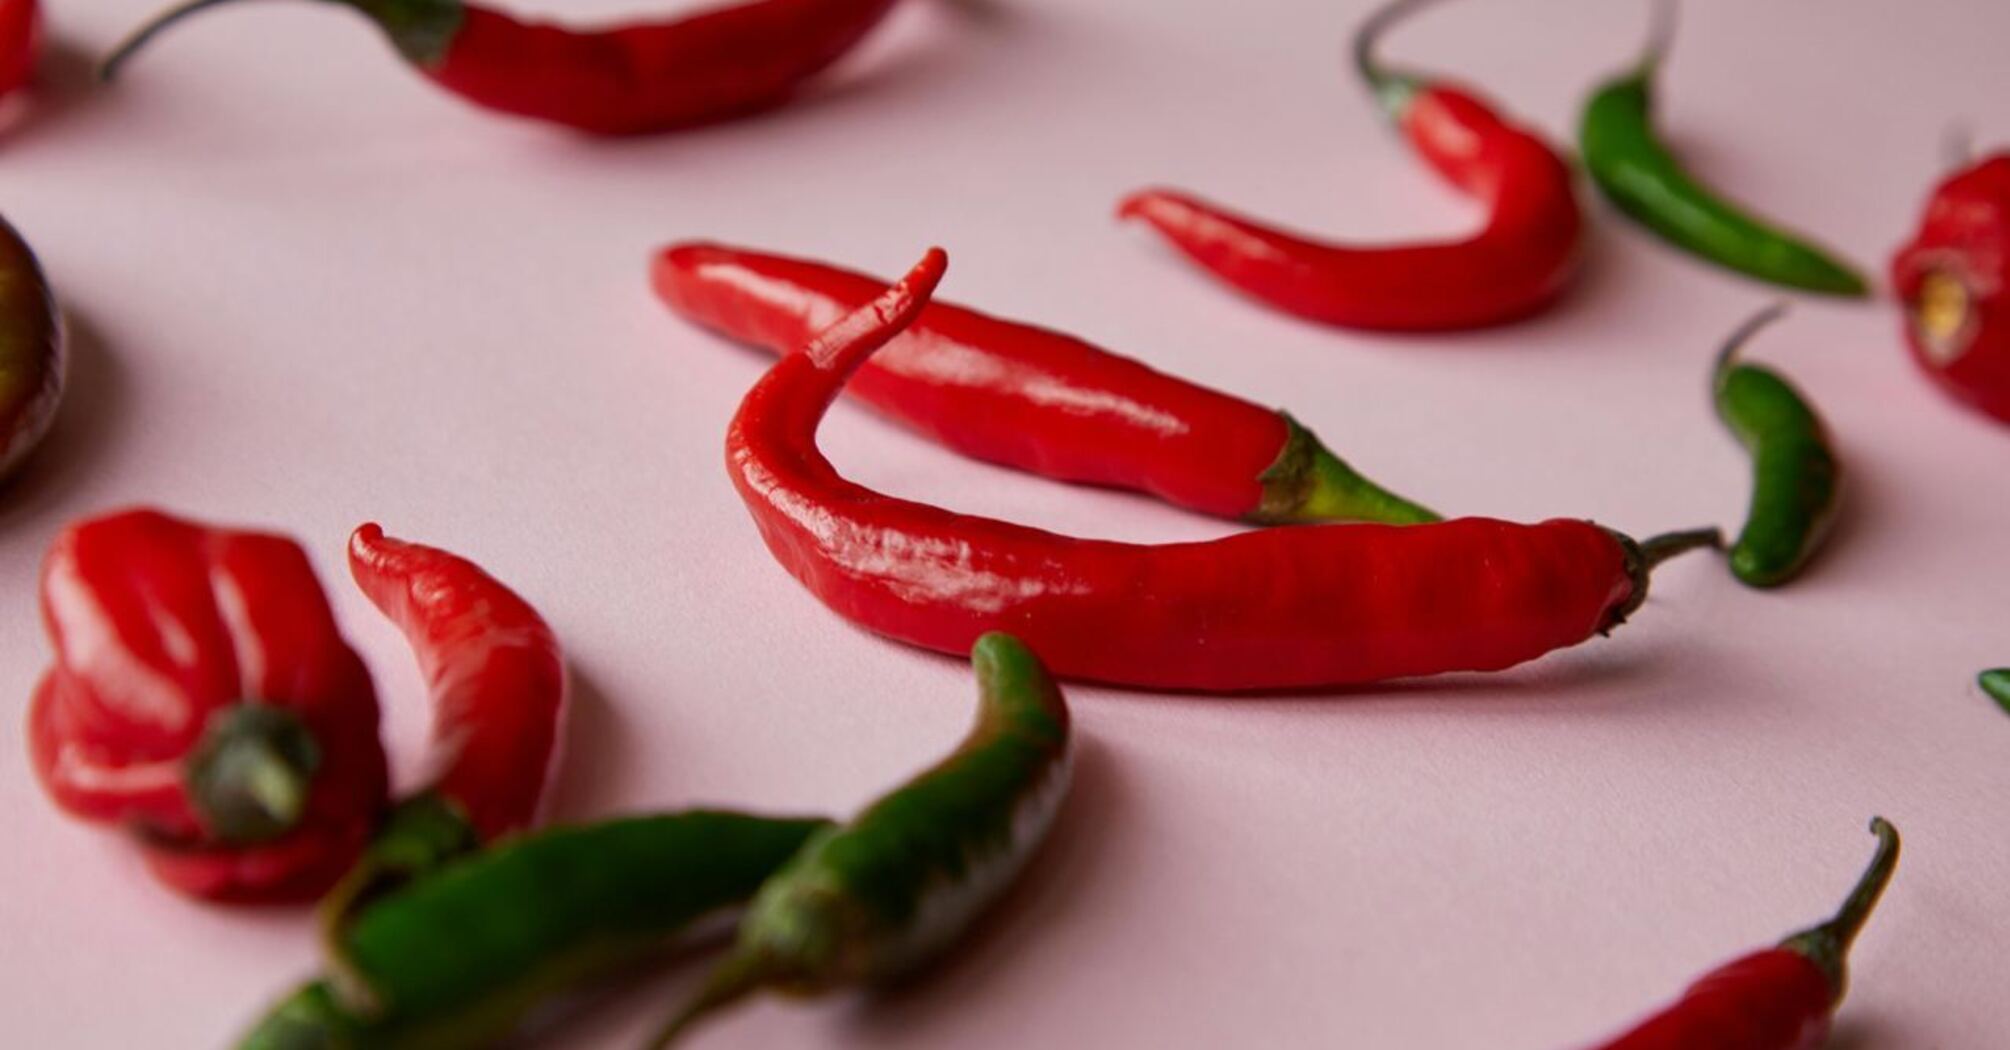 How to neutralize the burning sensation from spicy food